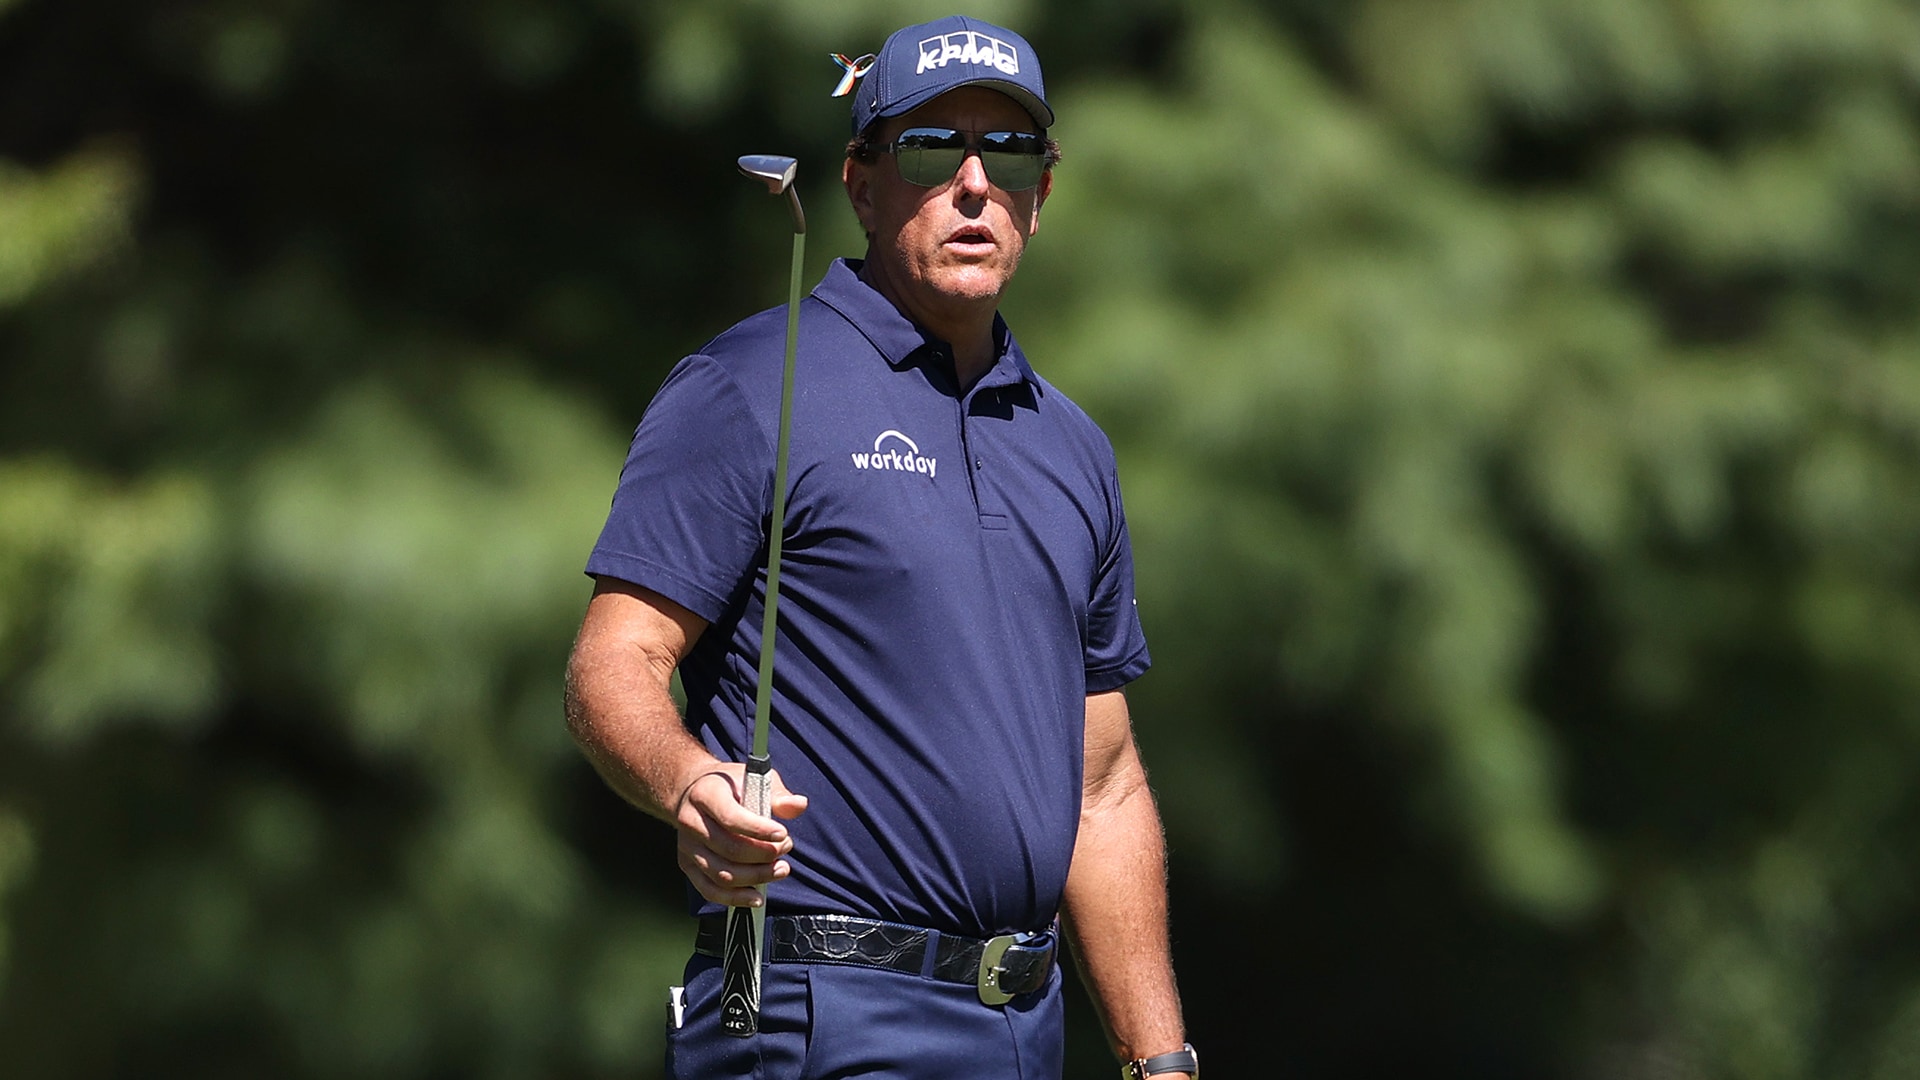 Phil Mickelson to make PGA Tour Champions debut after playoff exit